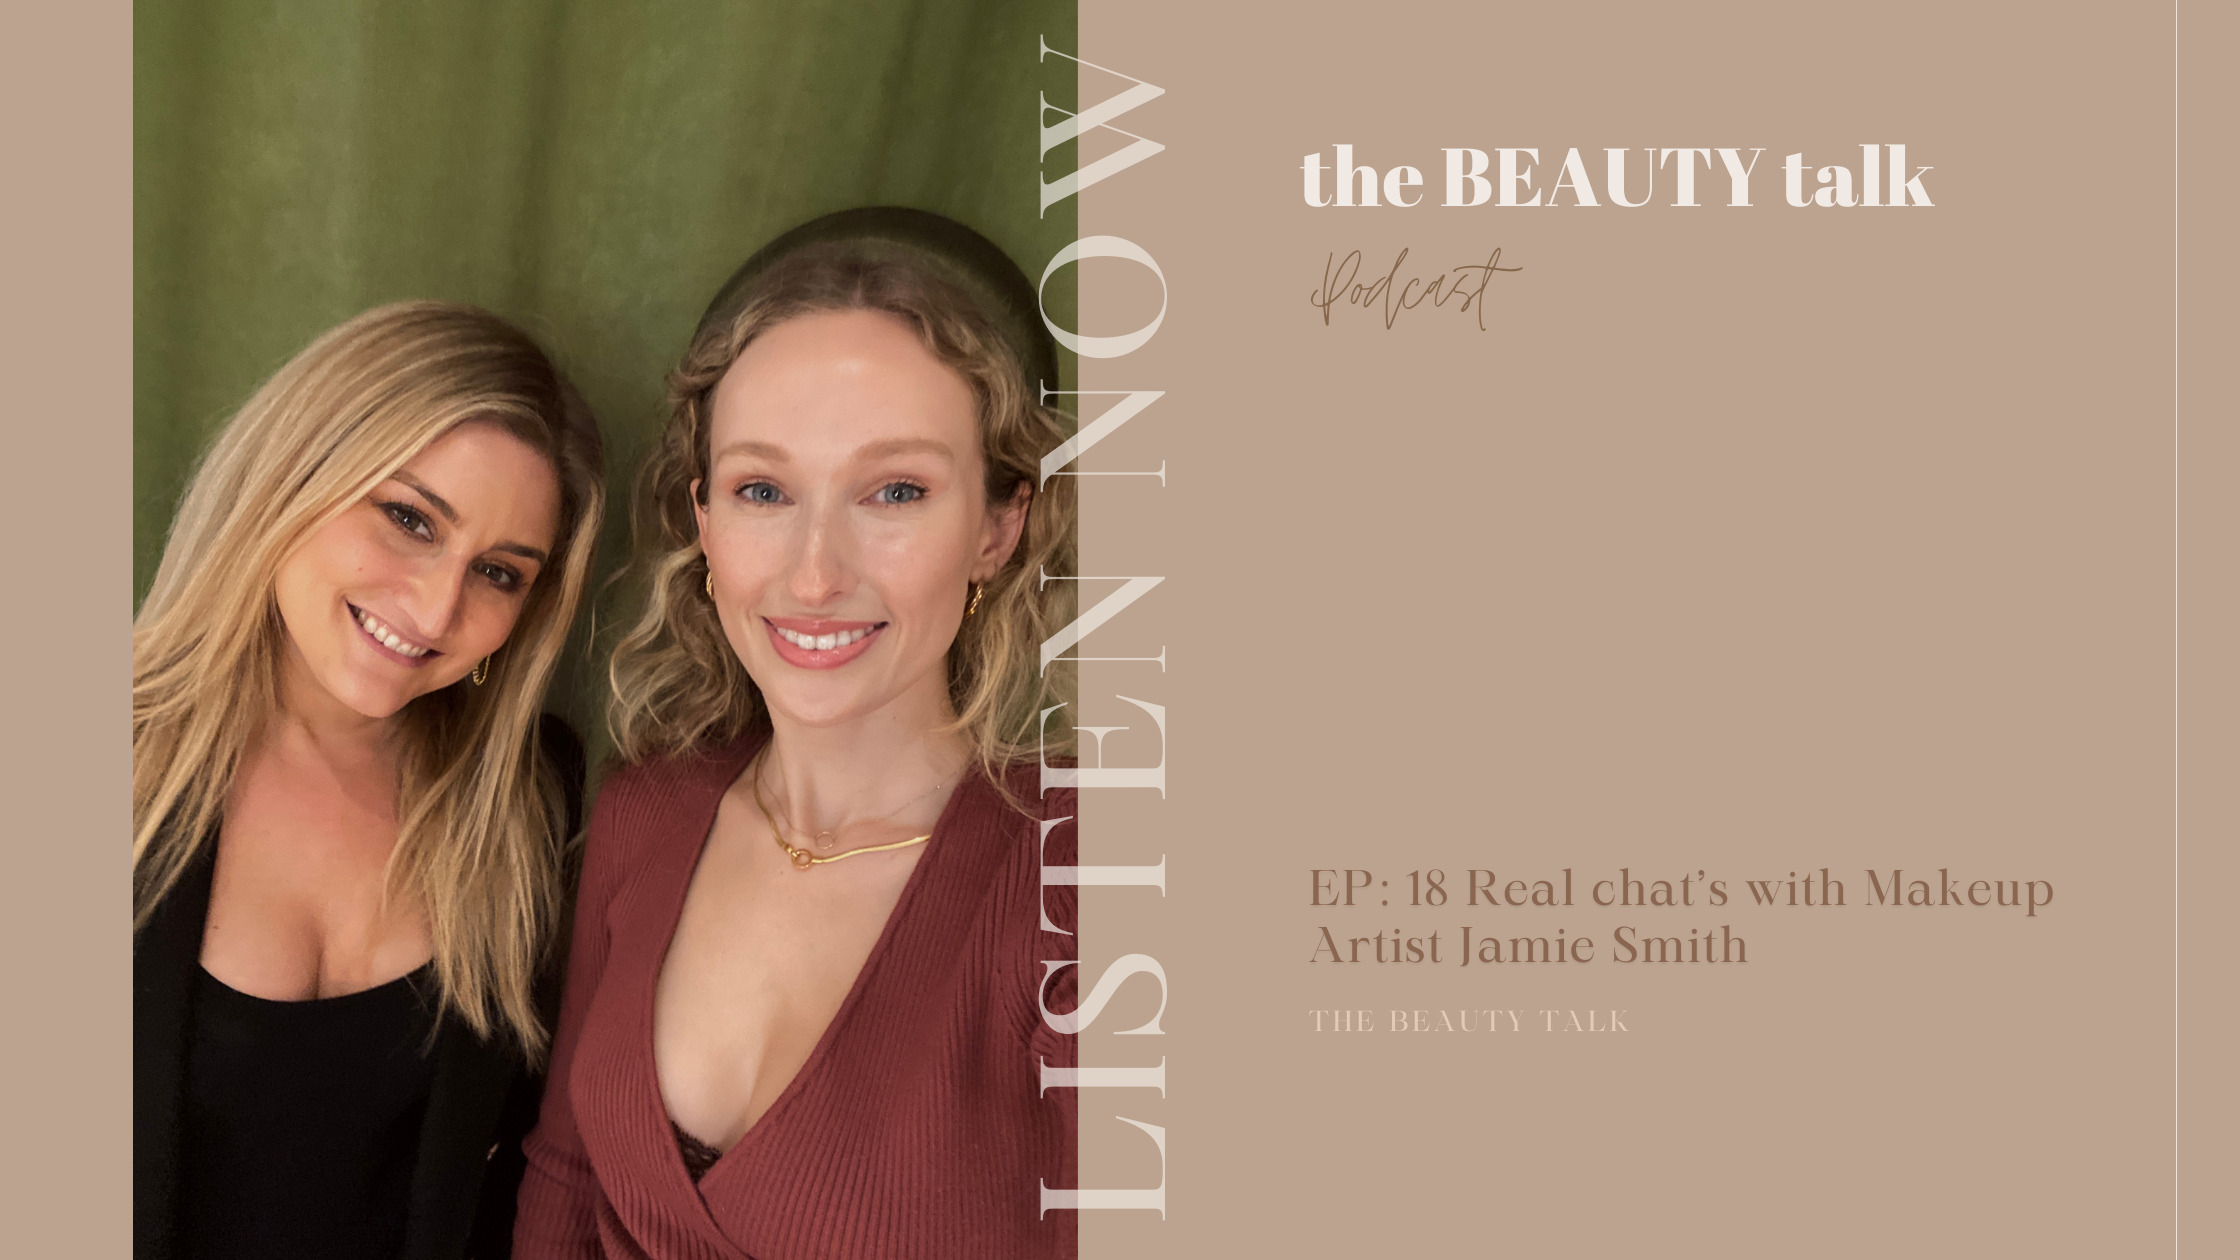 EP: 18 Real chat’s with Makeup Artist Jamie Smith